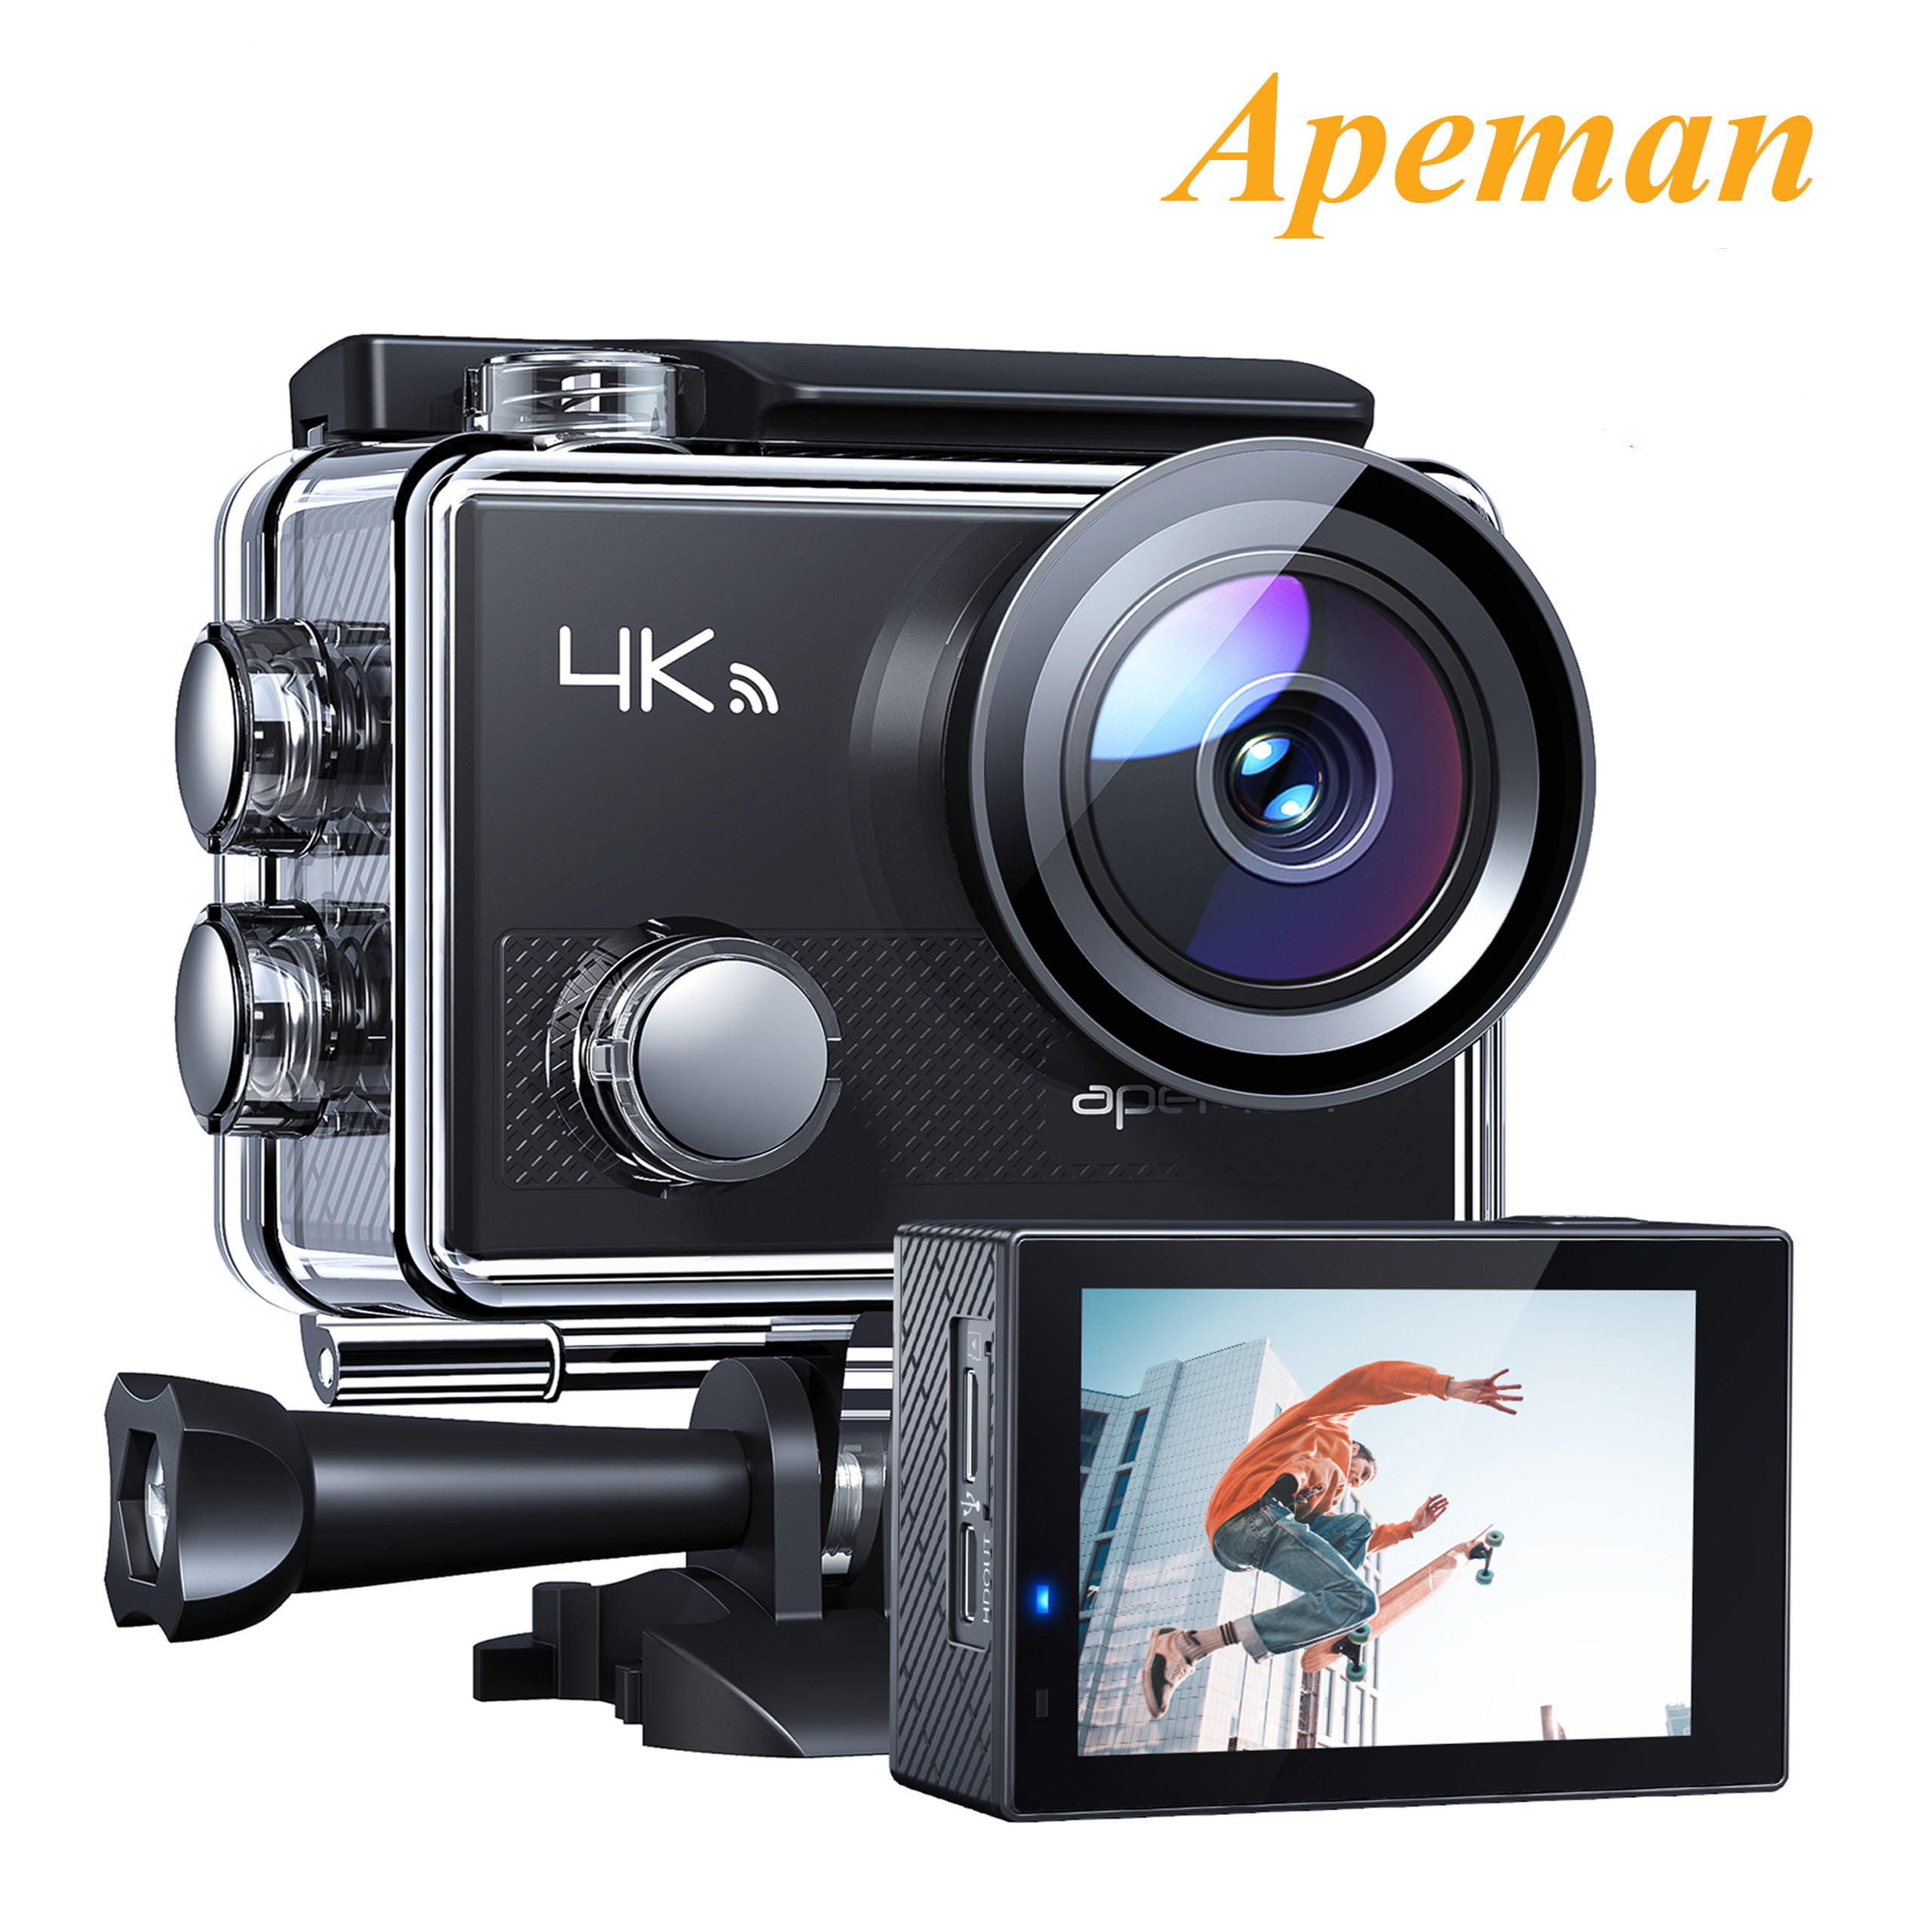 APEMAN Action Cameras A77,4K 16MP Webcam Ultra Full HD Wi-Fi Sport Cam 30M with 